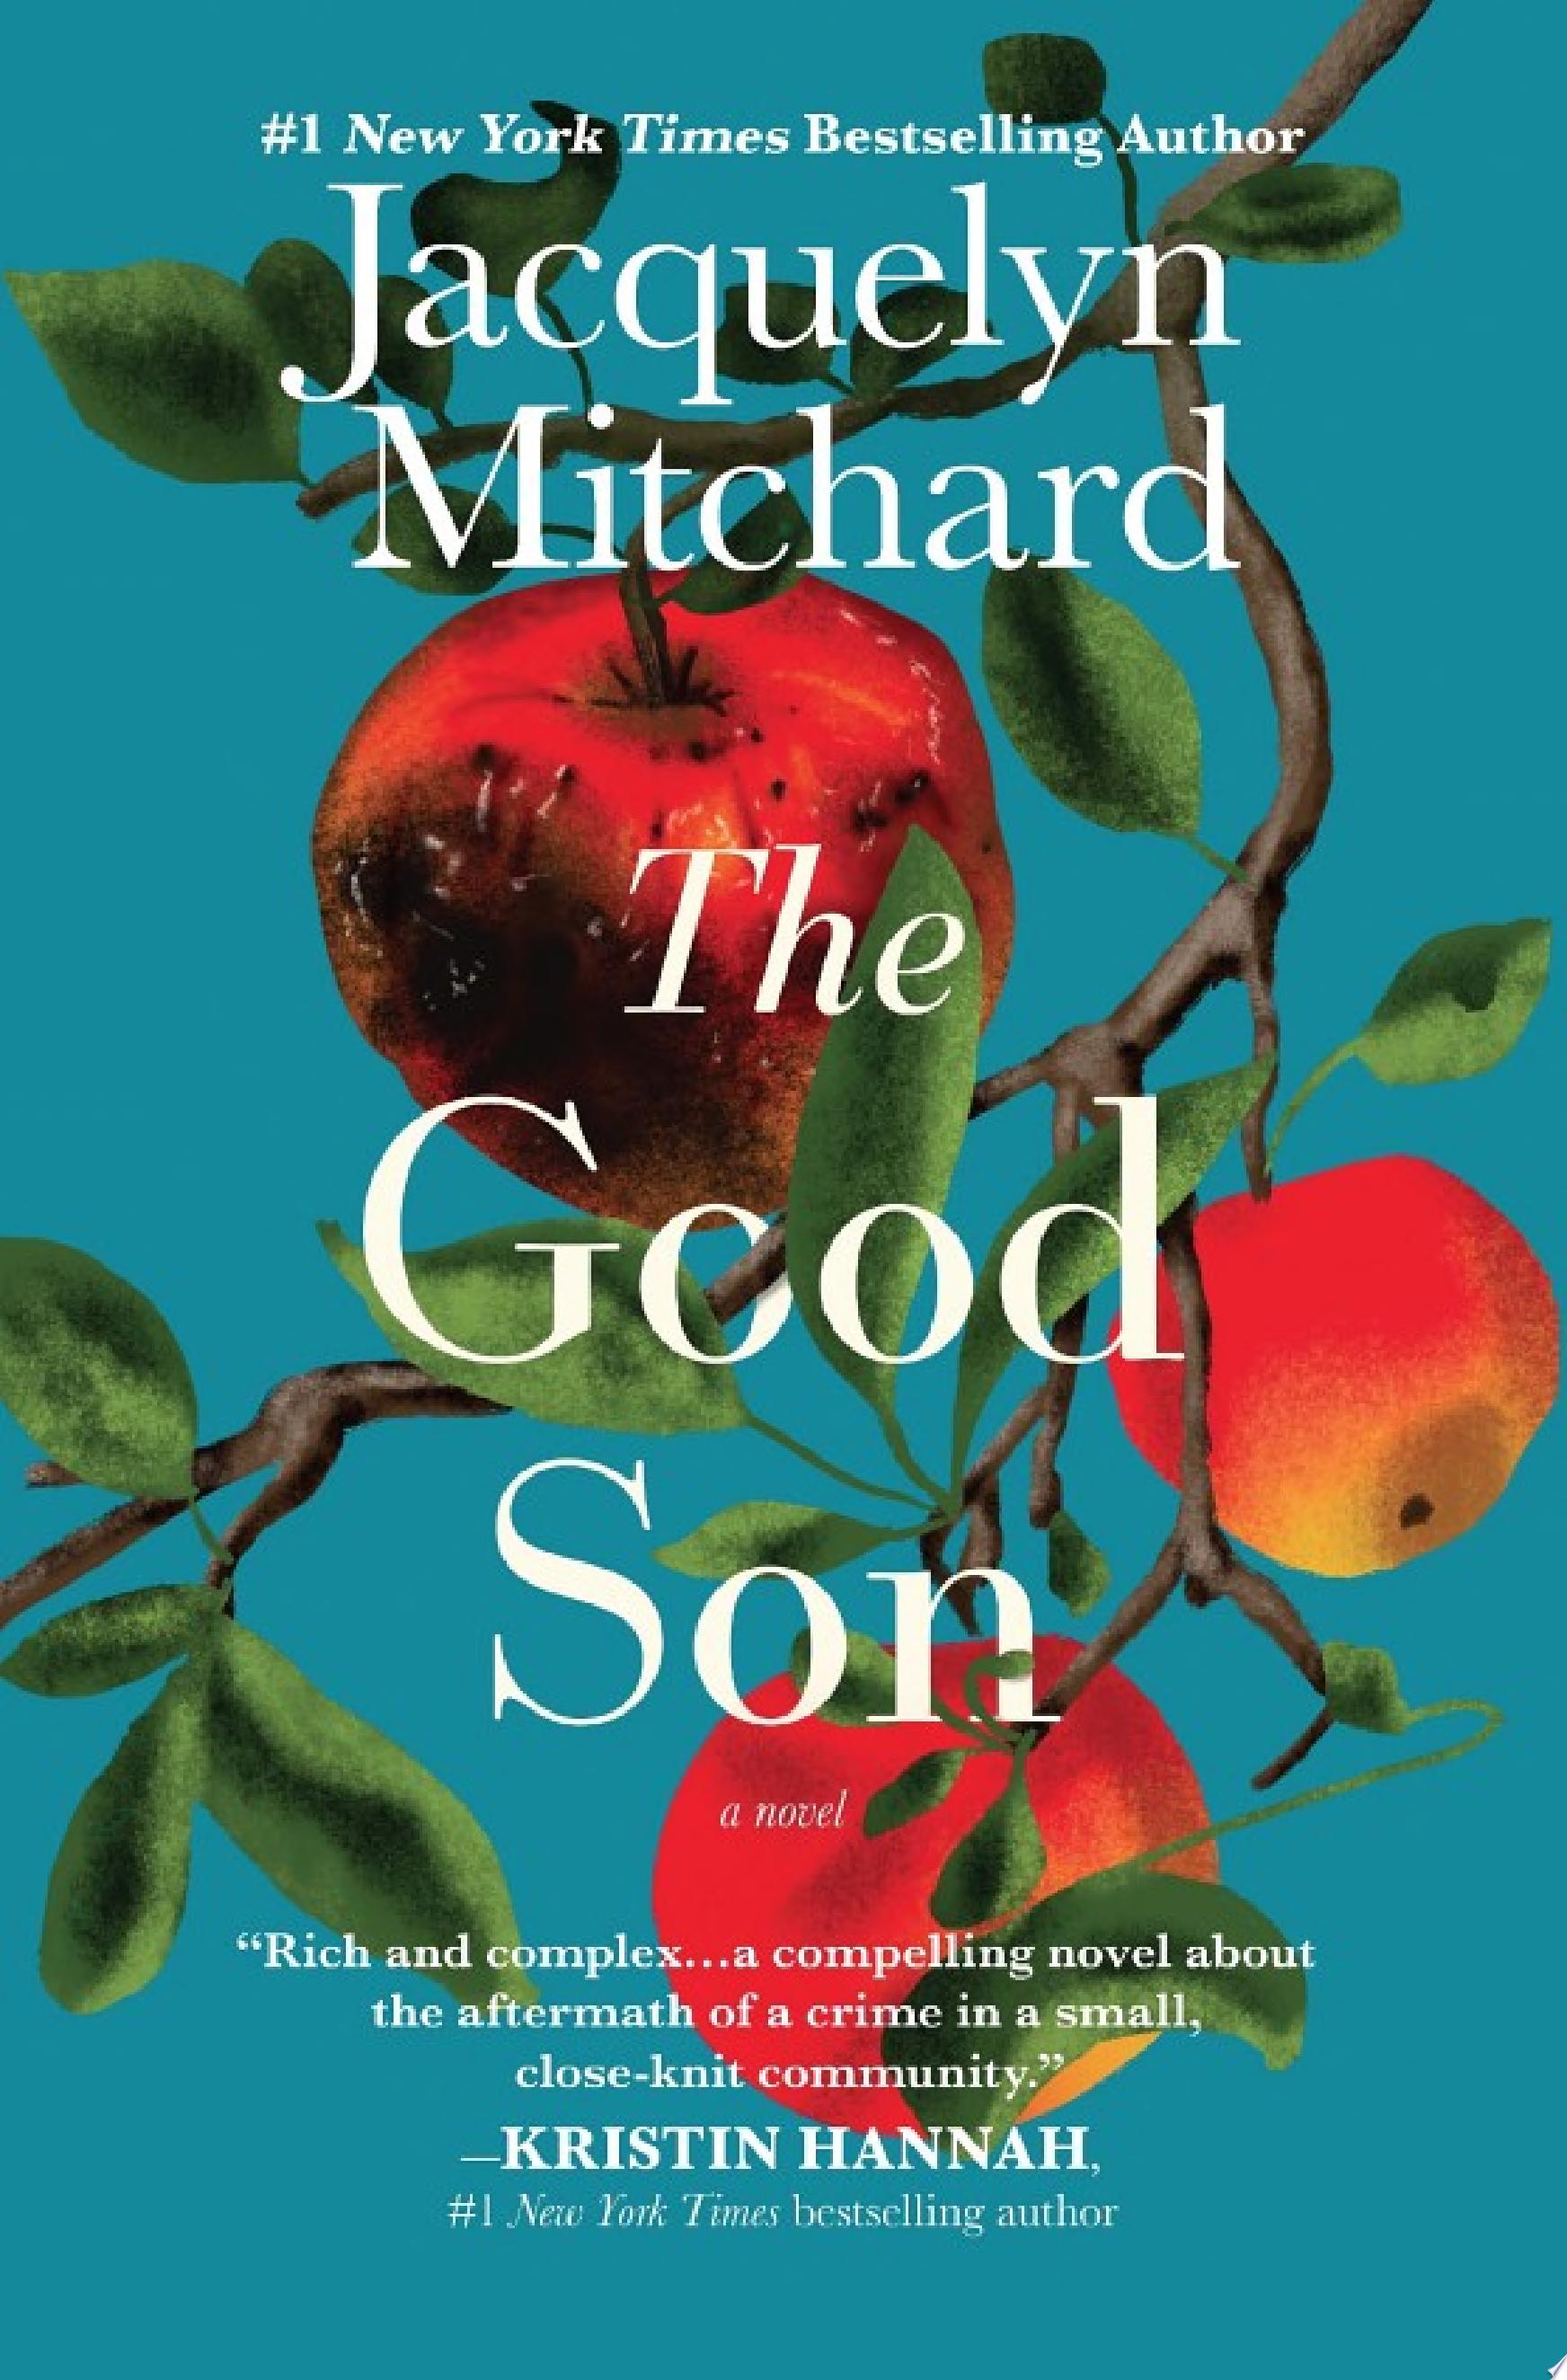 Image for "The Good Son"